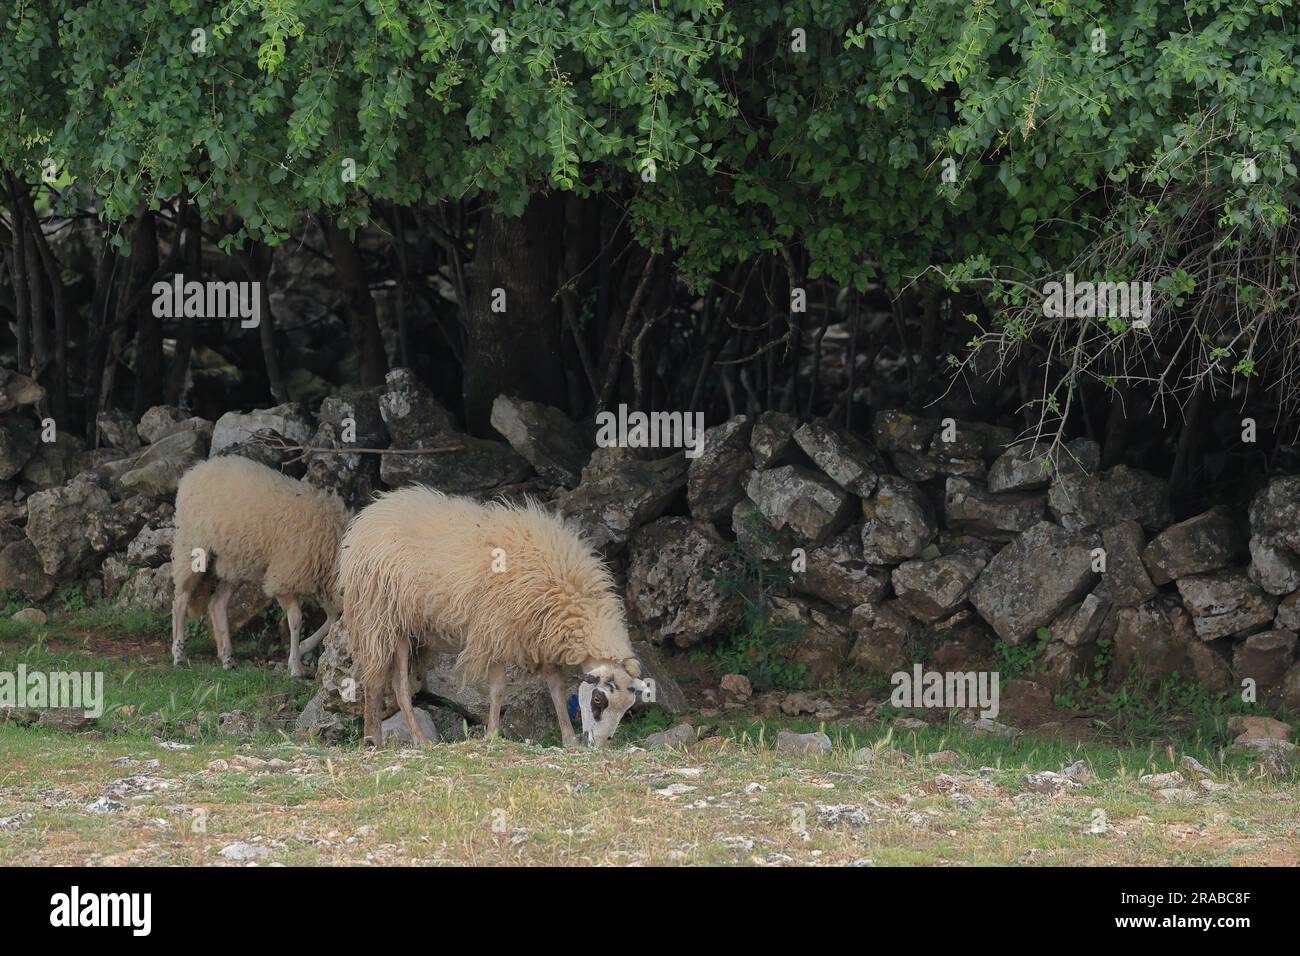 close up of a grazing sheep Stock Photo